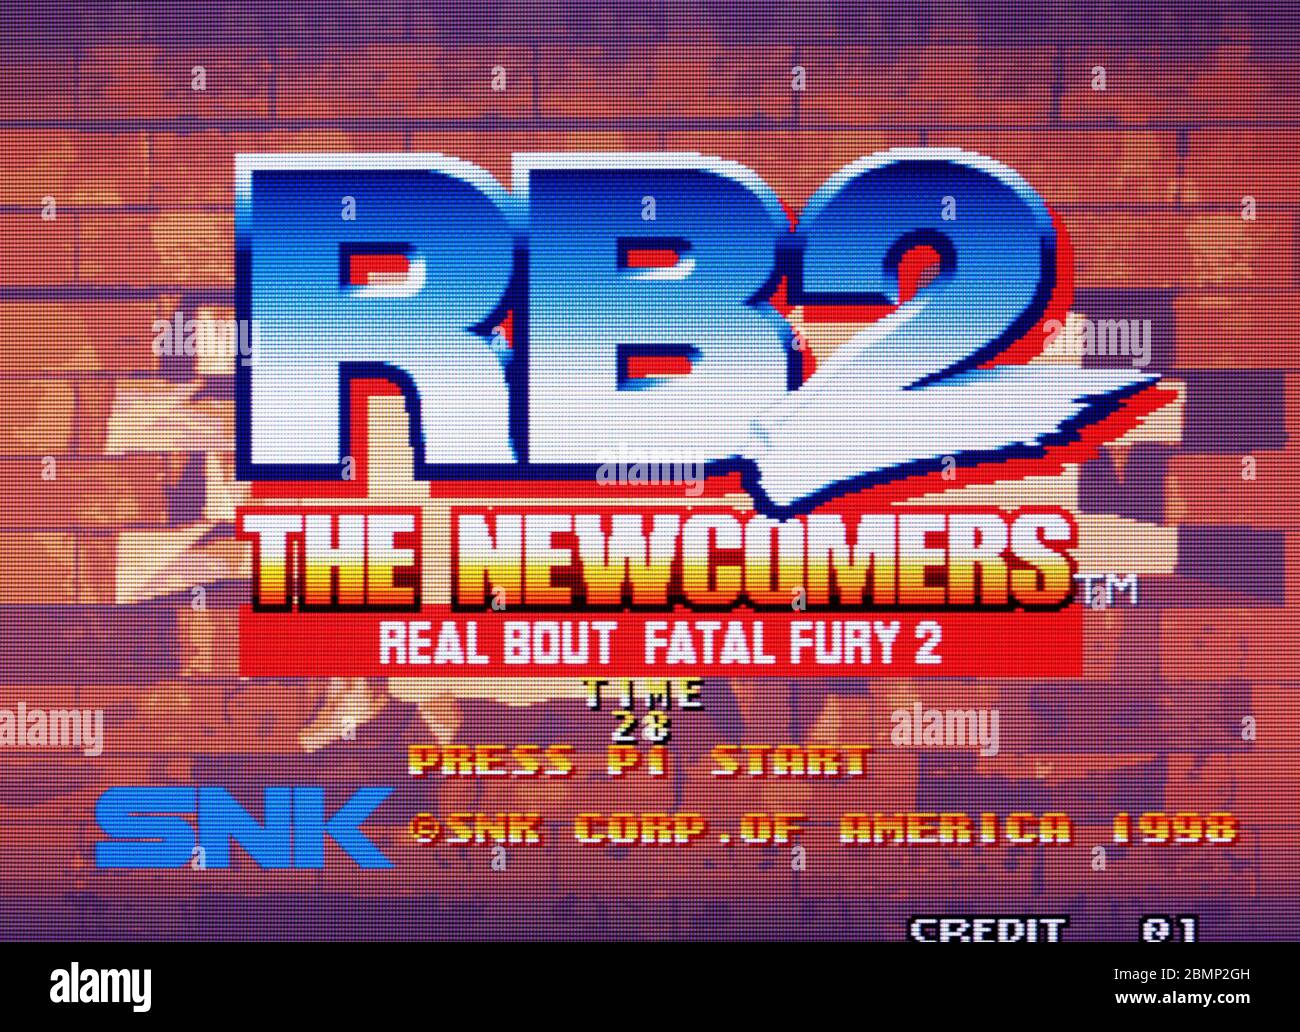 Real Bout Fatal Fury 2 The Newcomers RB2 - SNK Neo-Geo NeoGeo - Editorial use only Stock Photo